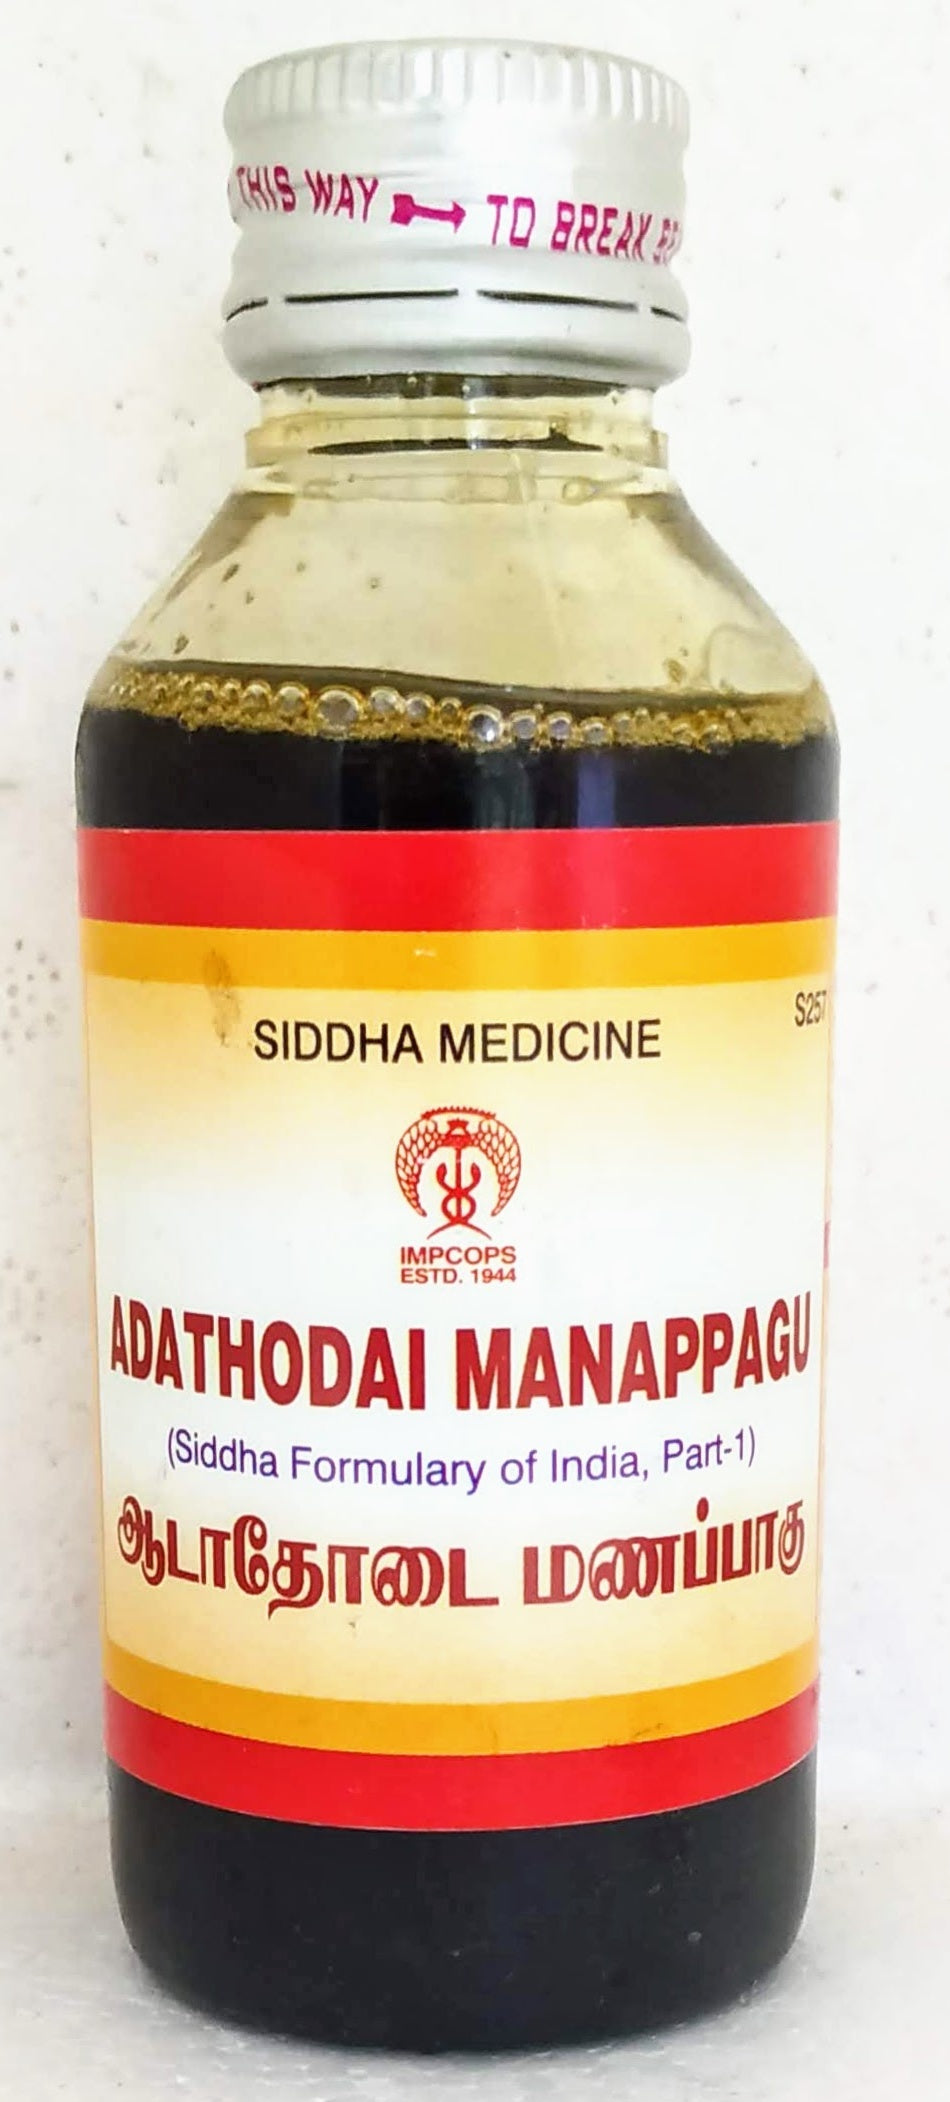 Shop Impcops Adathodai Manappagu 100ml at price 131.00 from Impcops Online - Ayush Care